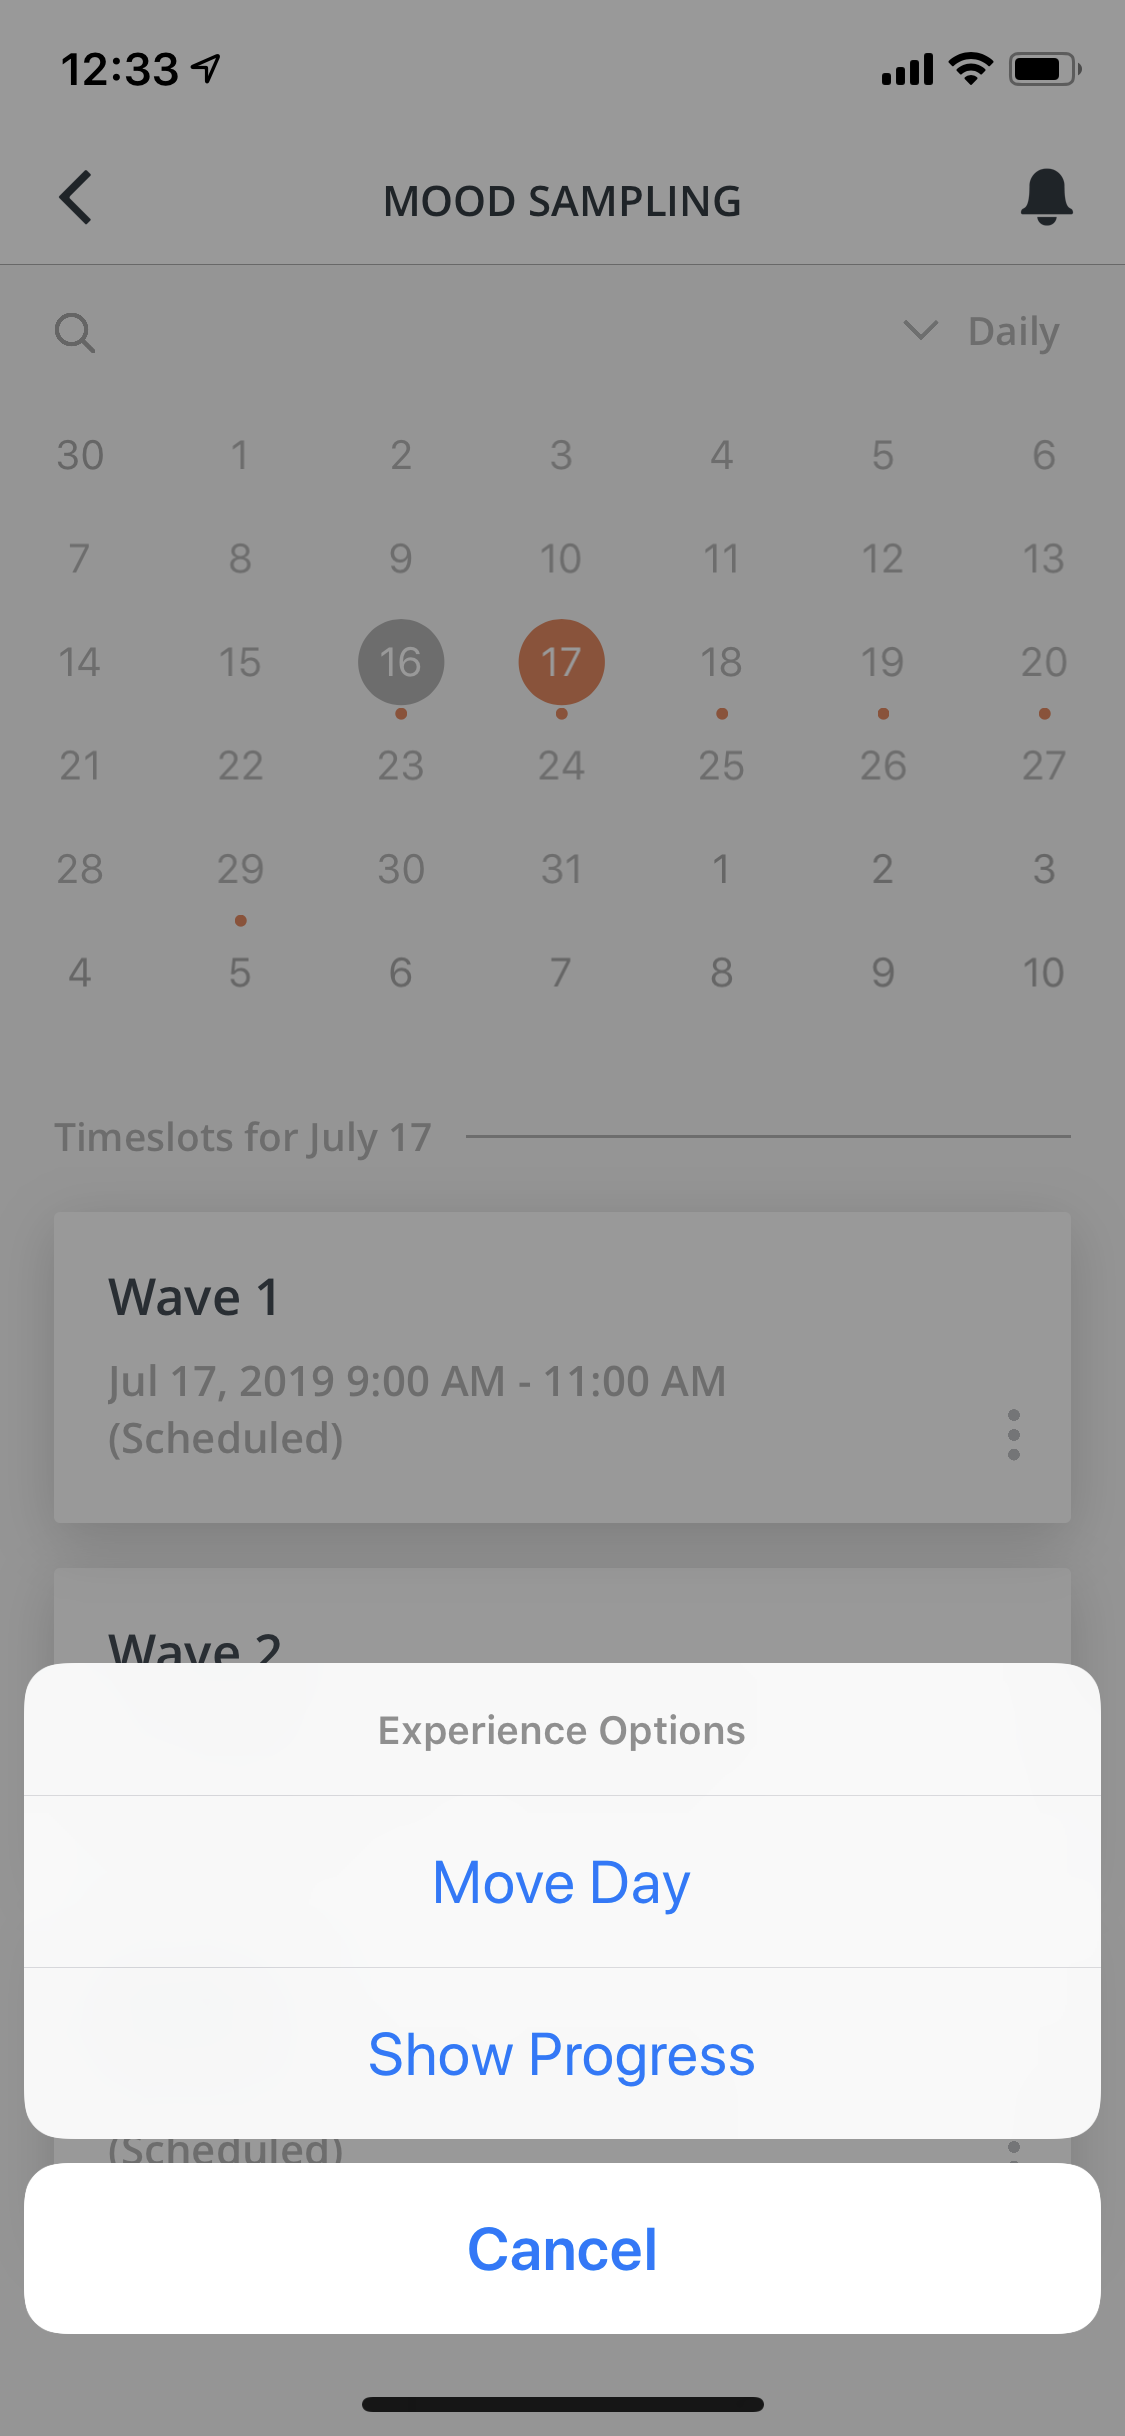 Experience option to move day or show progress